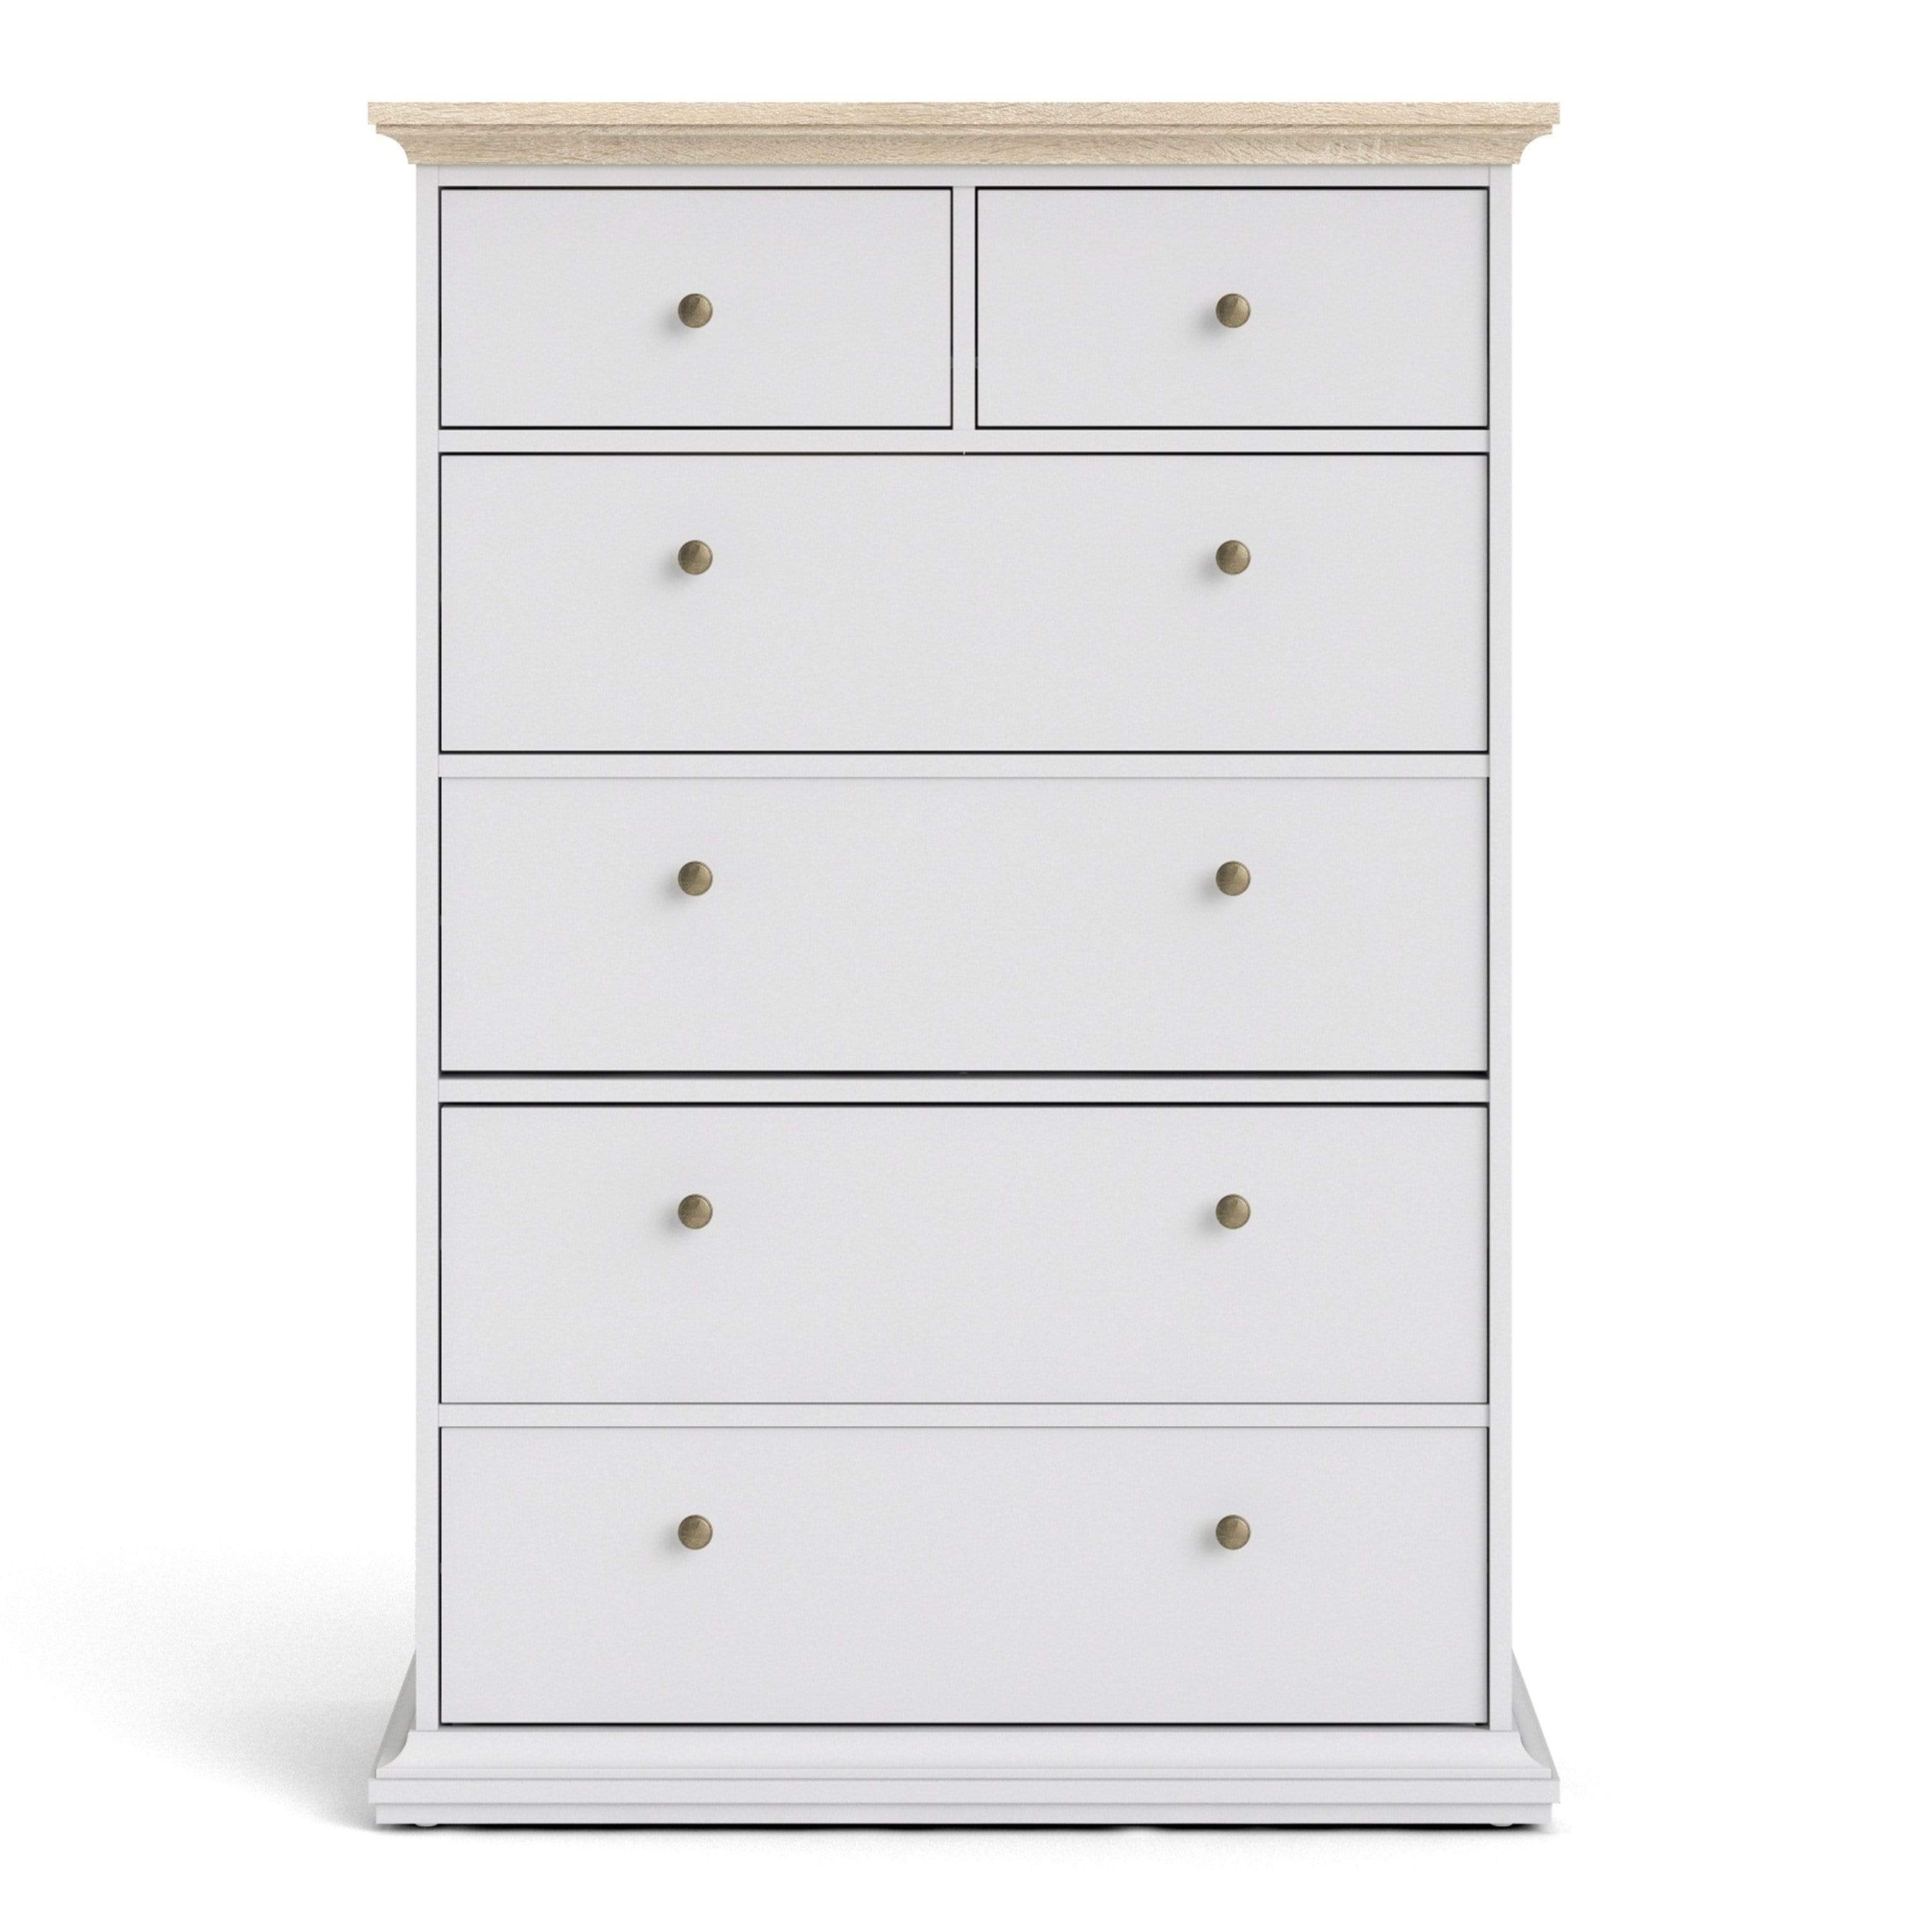 FTG Chest Of Drawers Paris Chest of 6 Drawers in White and Oak Bed Kings